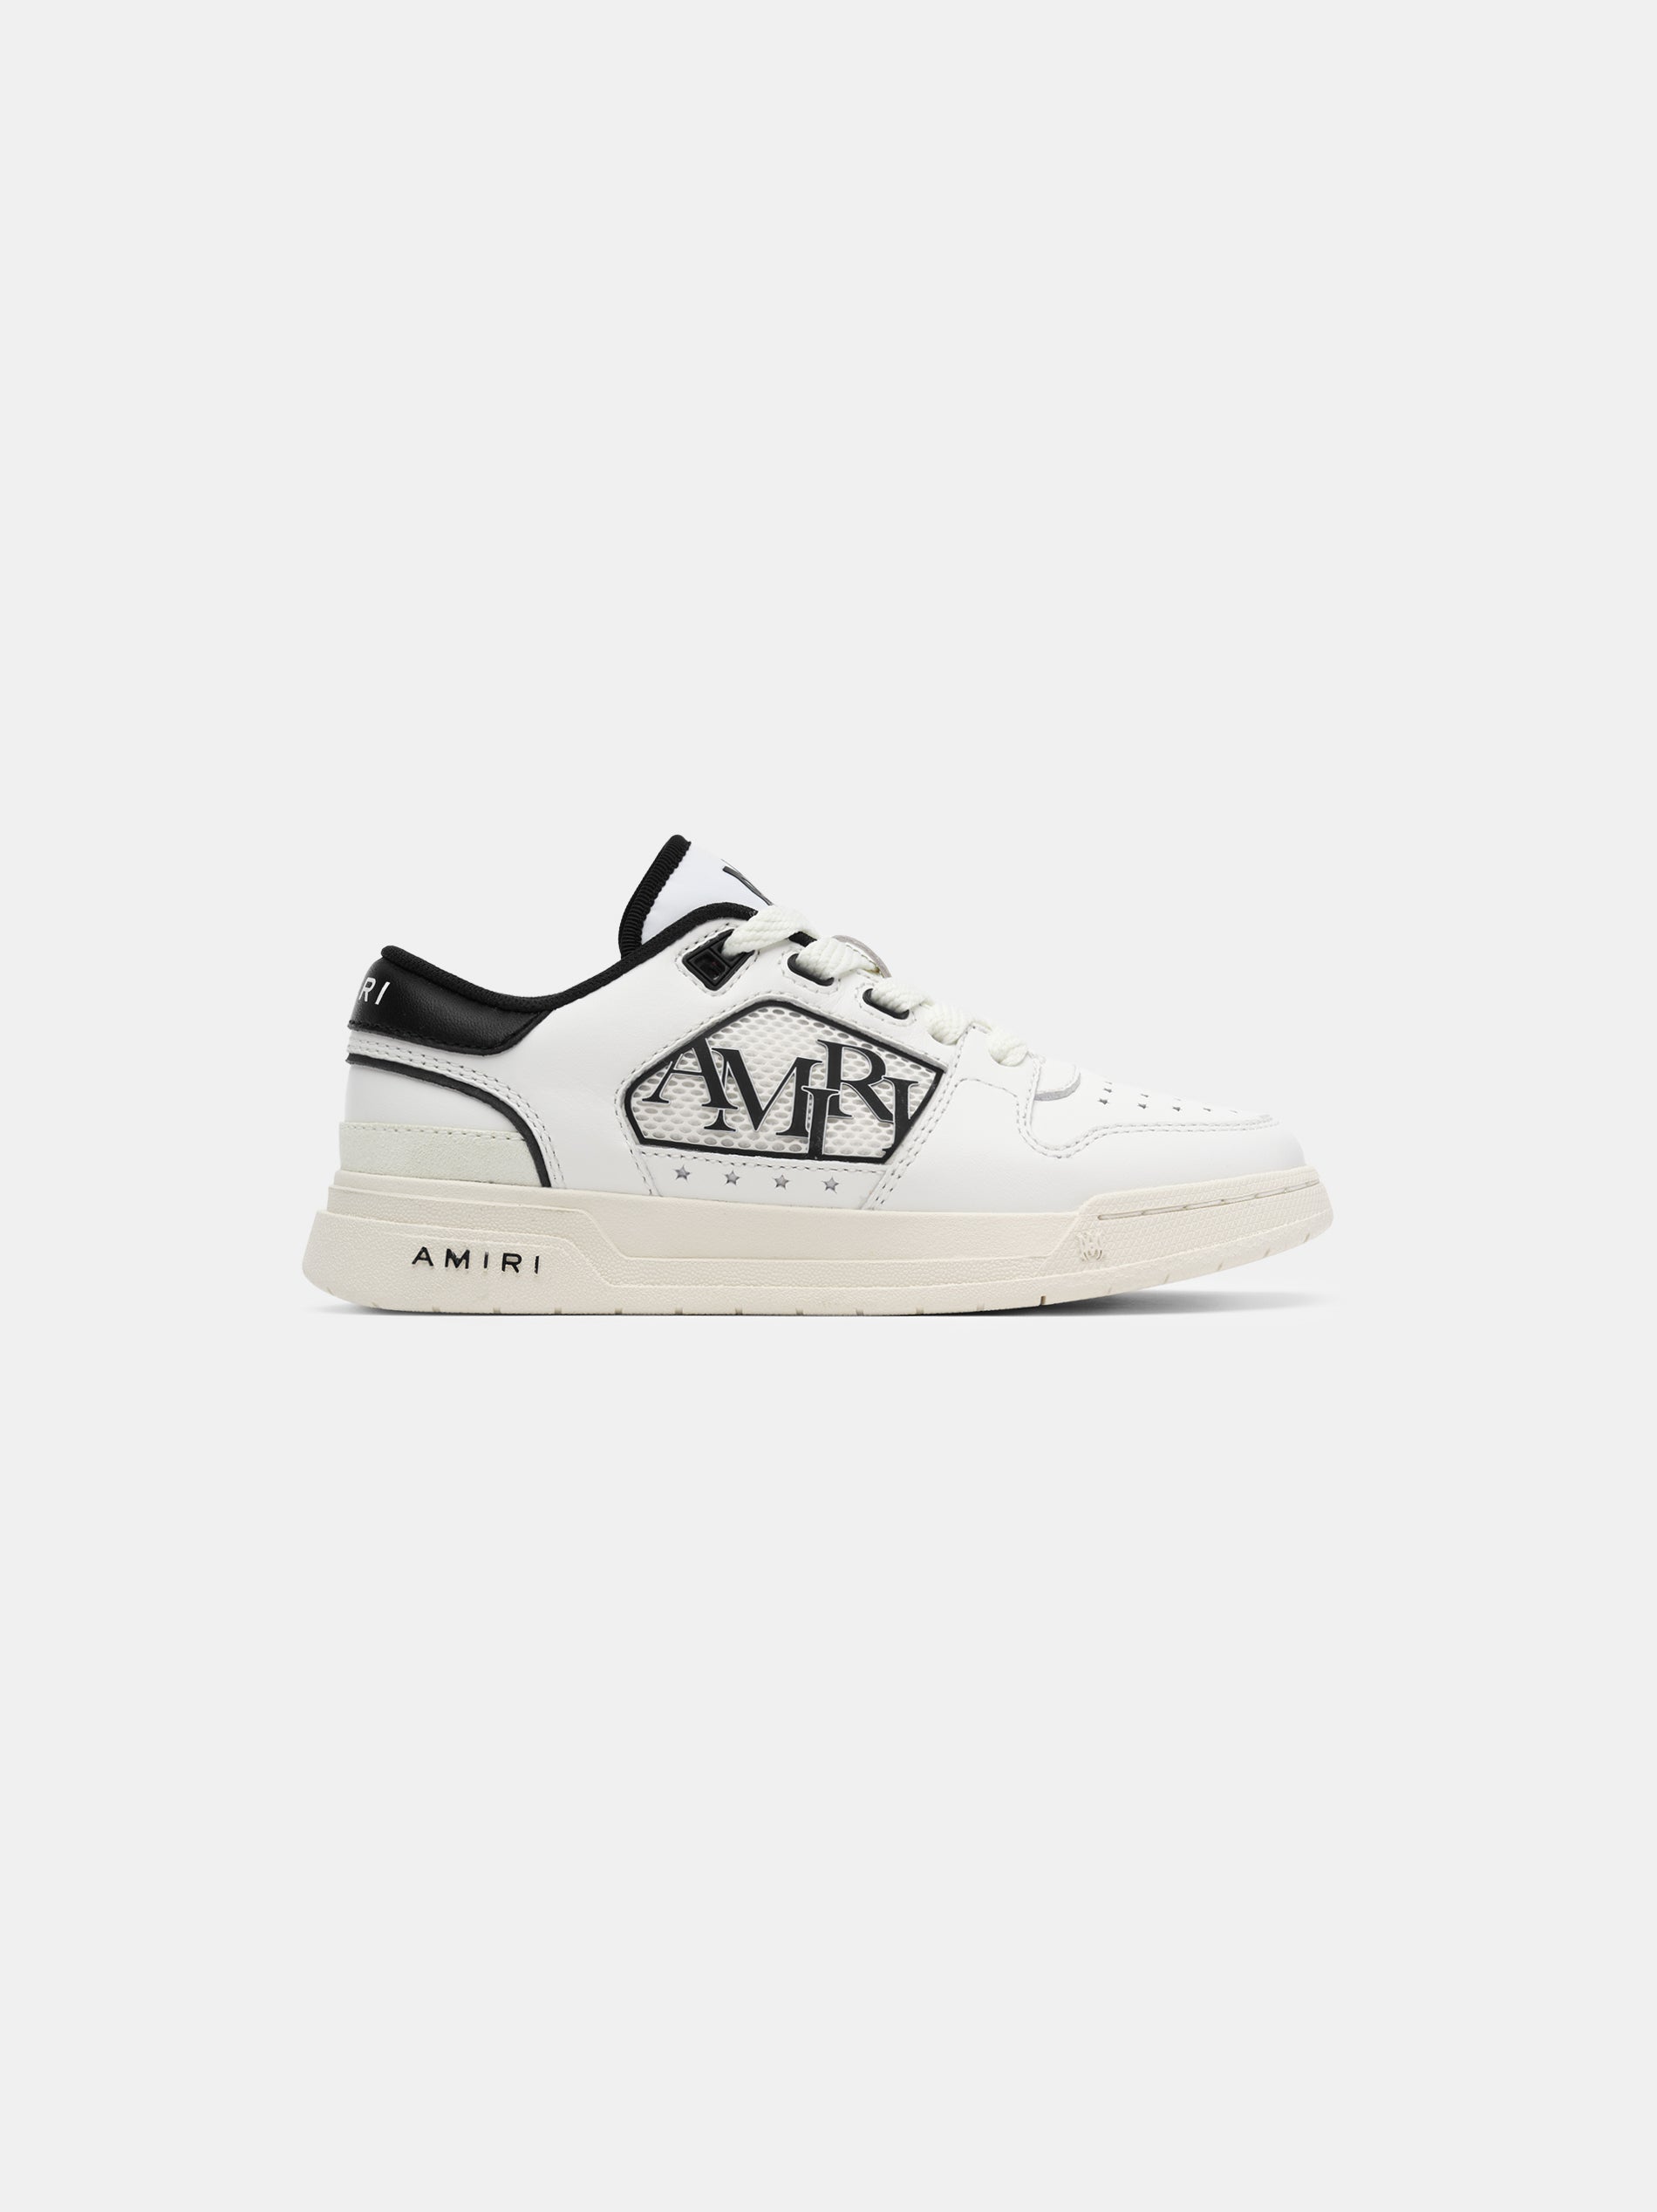 Product KIDS - KIDS' CLASSIC LOW - White Black featured image